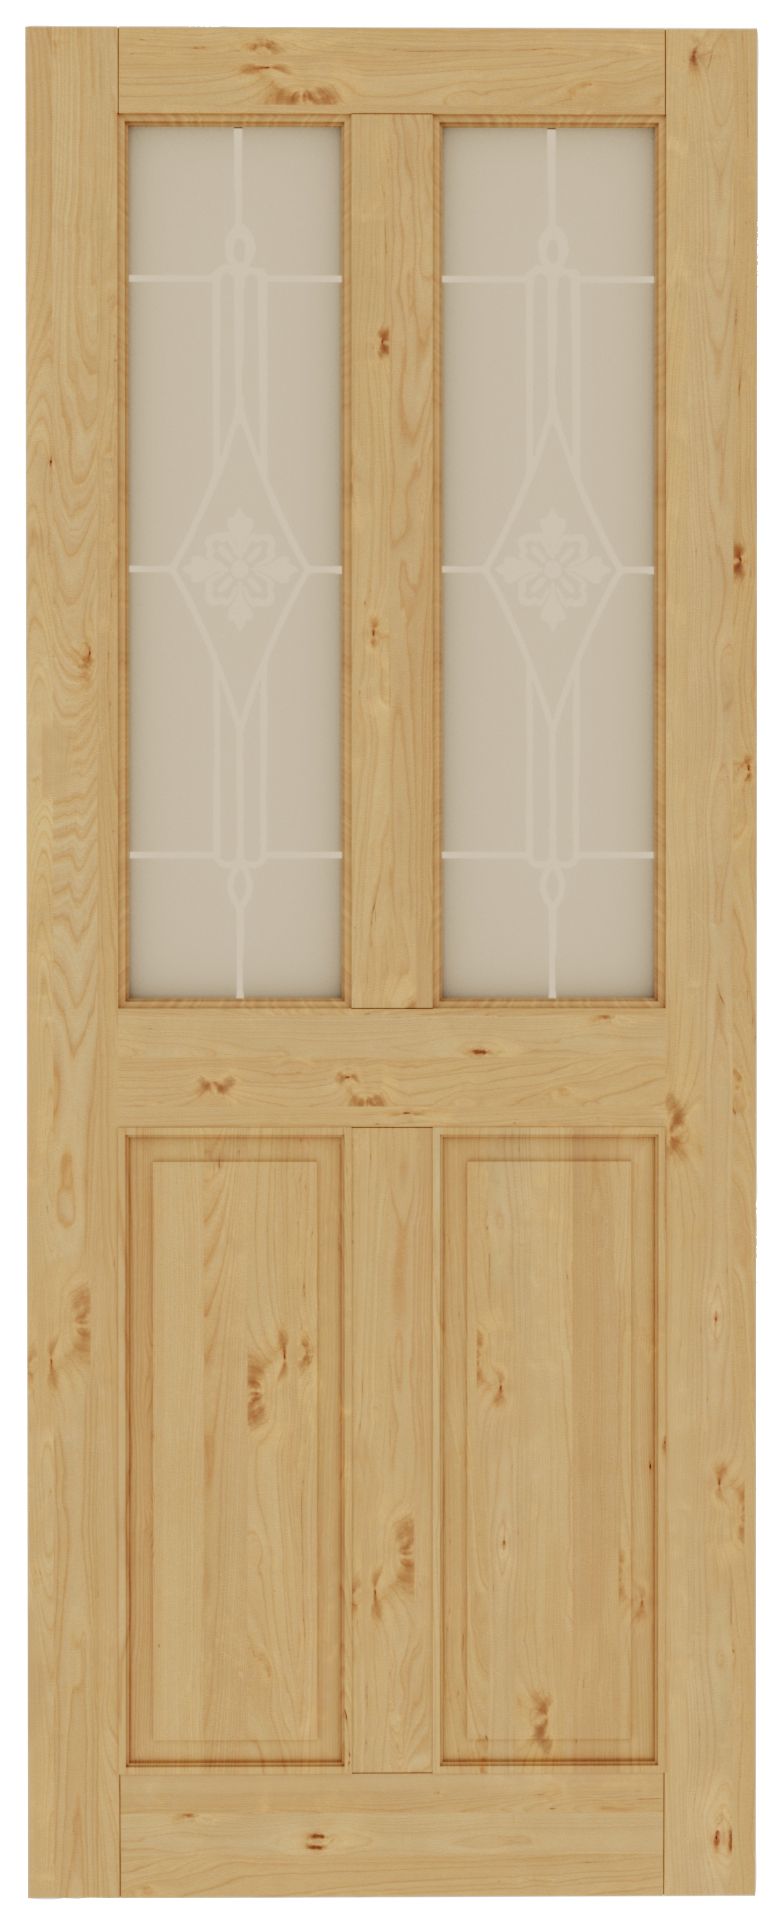 Image of Wickes Chester 4 Panel Knotty Pine Glazed Door - 1981 x 686mm